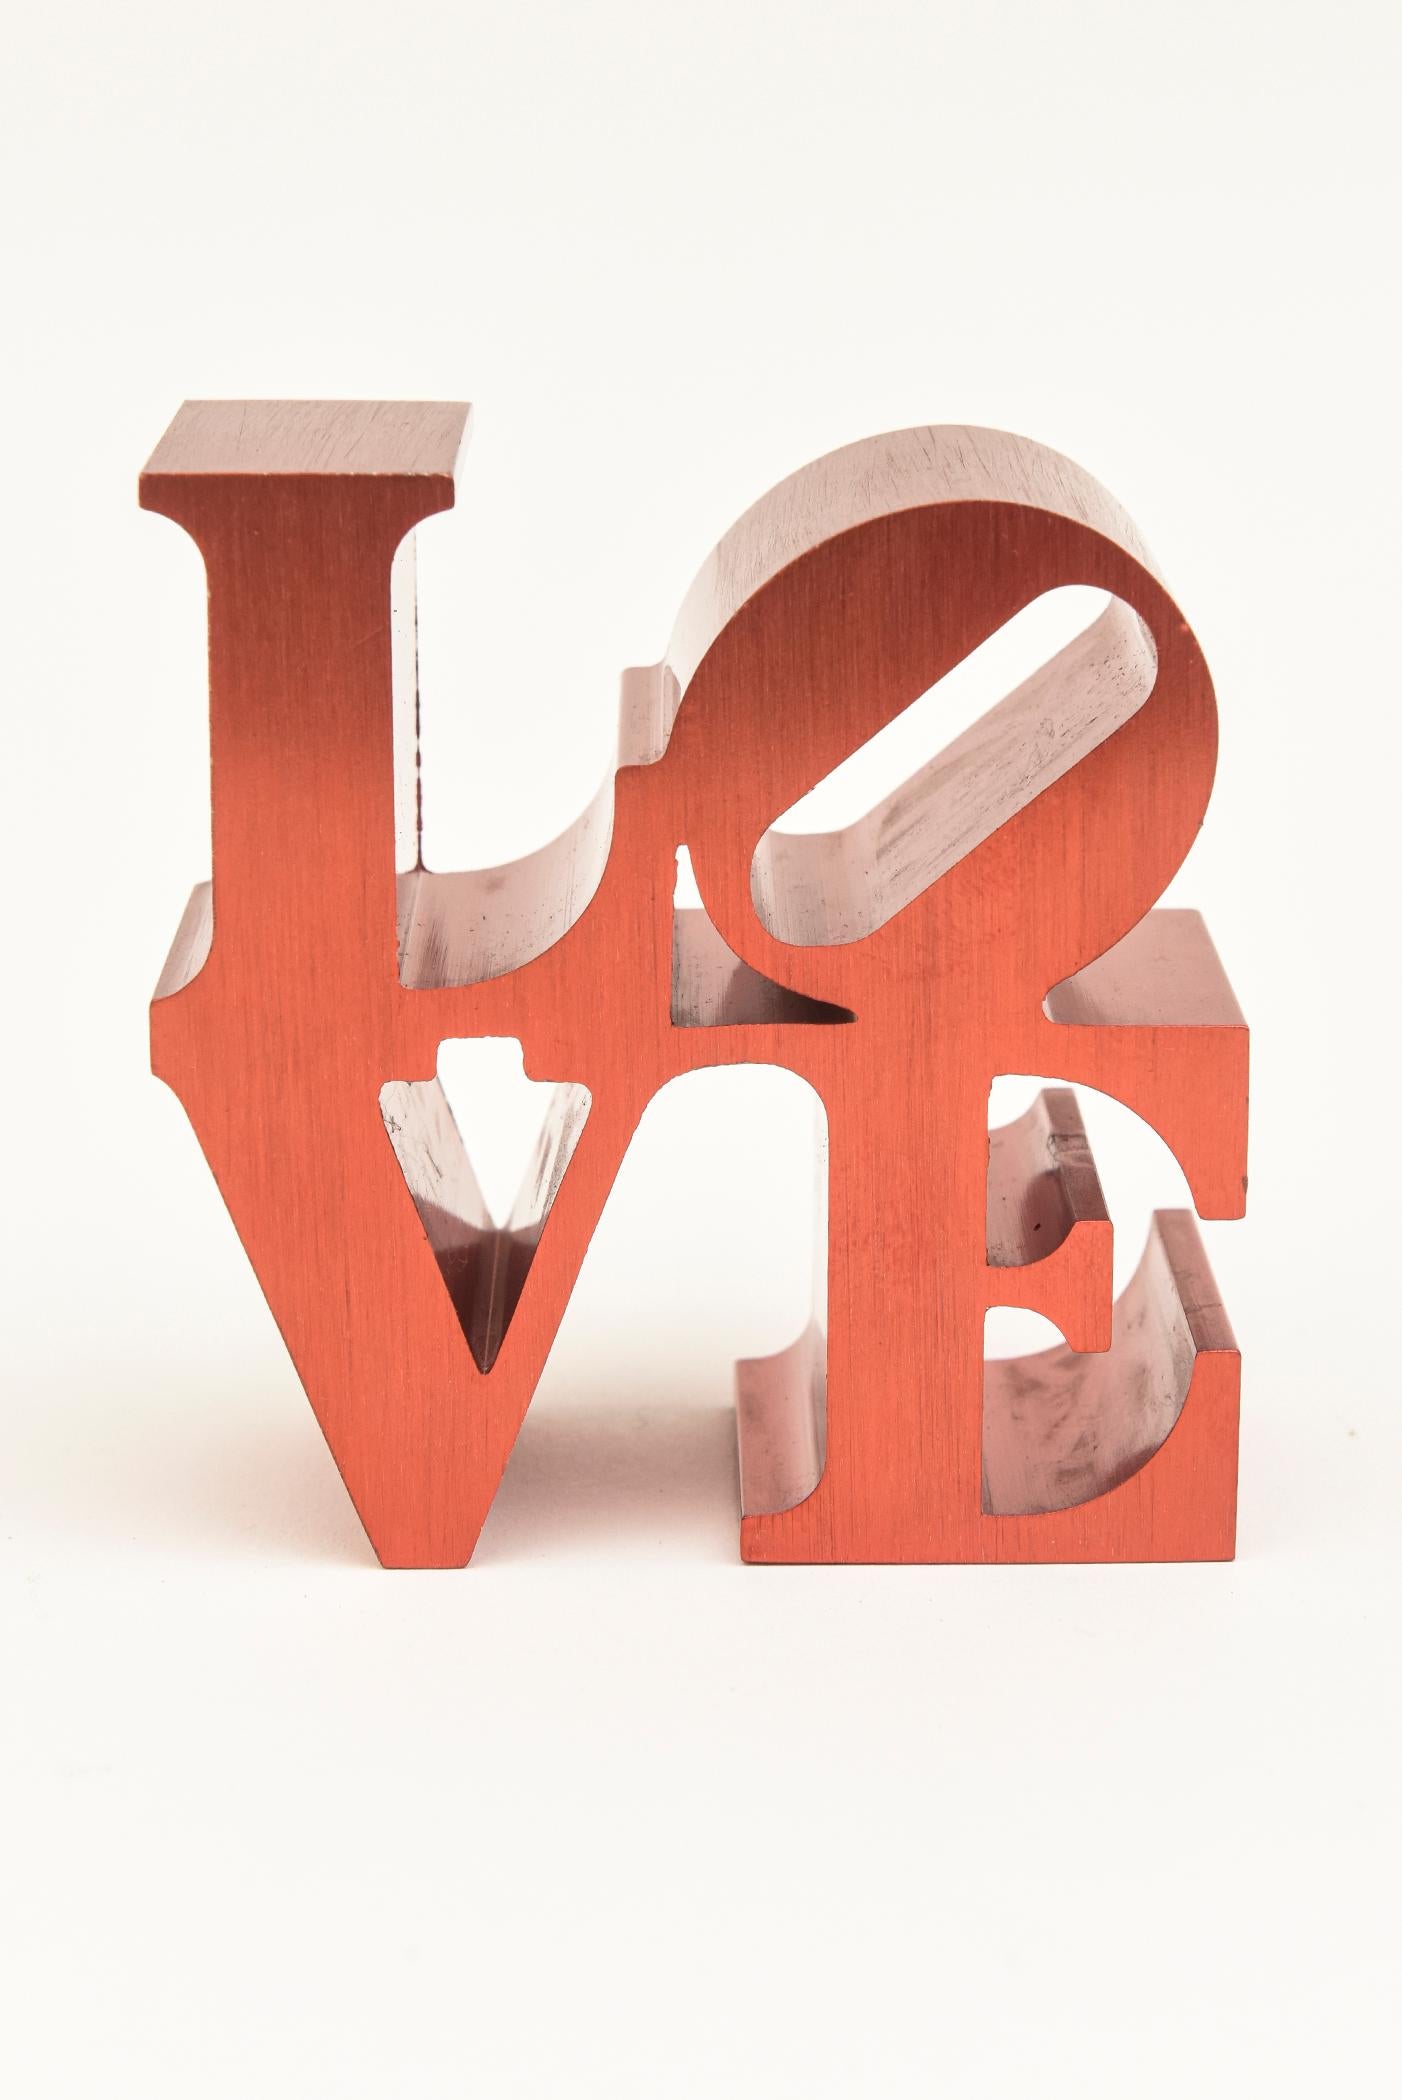 Robert Indiana Brushed Aluminum Red Love Paperweight Sculpture Desk Accessory For Sale 3